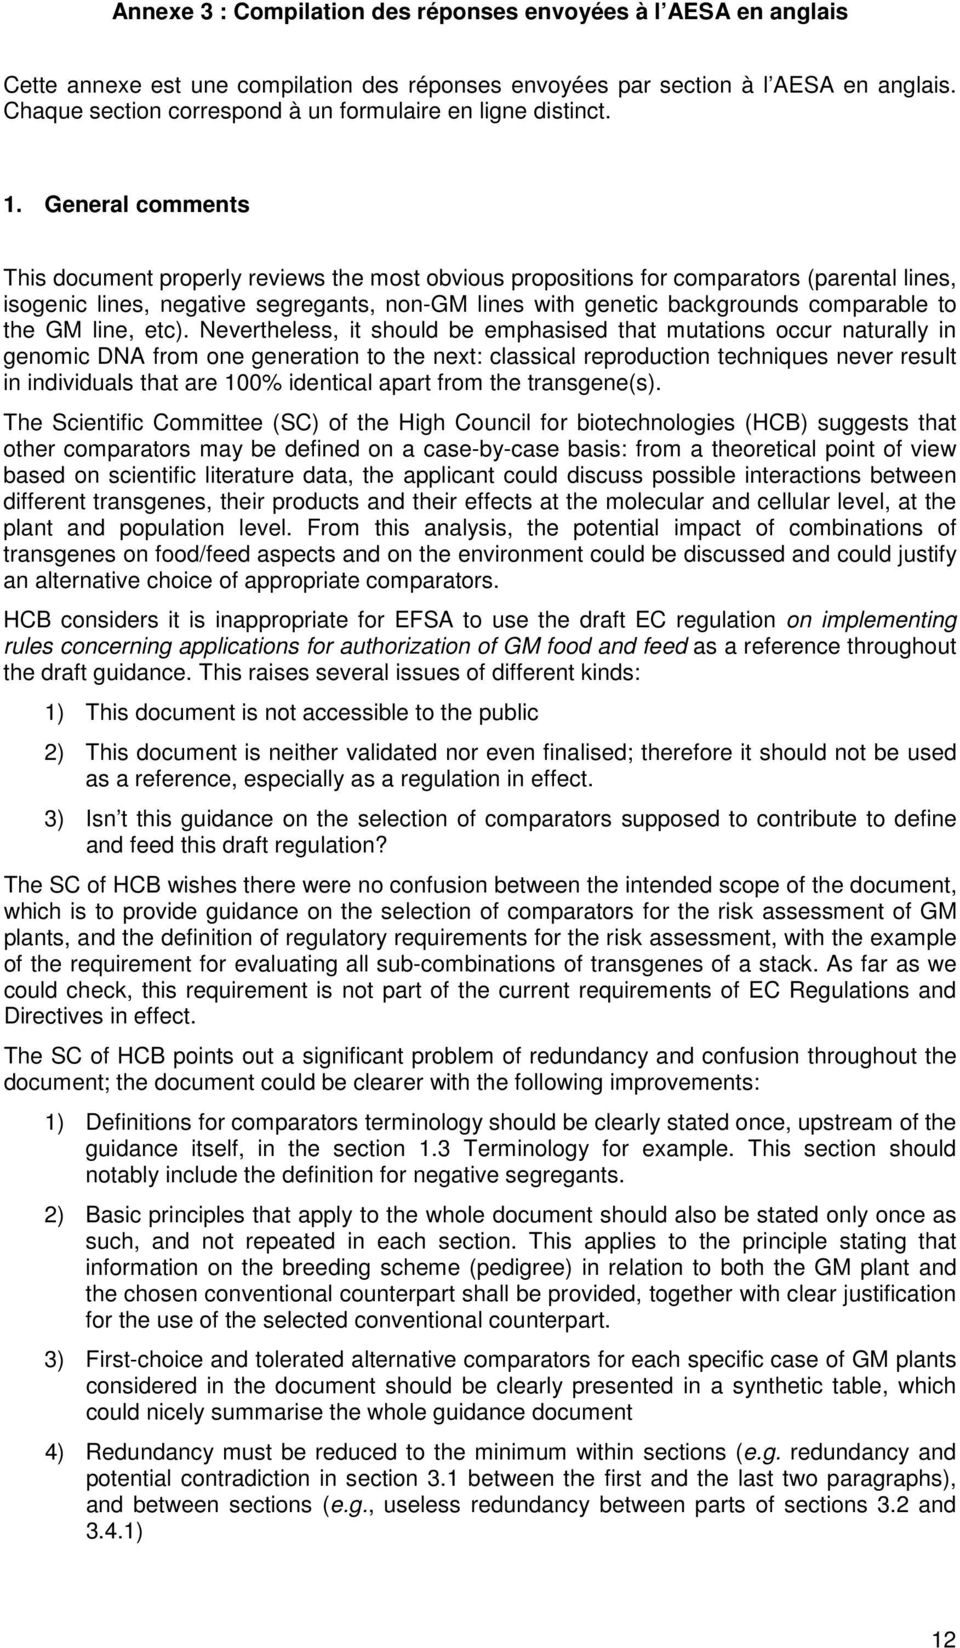 General comments This document properly reviews the most obvious propositions for comparators (parental lines, isogenic lines, negative segregants, non-gm lines with genetic backgrounds comparable to